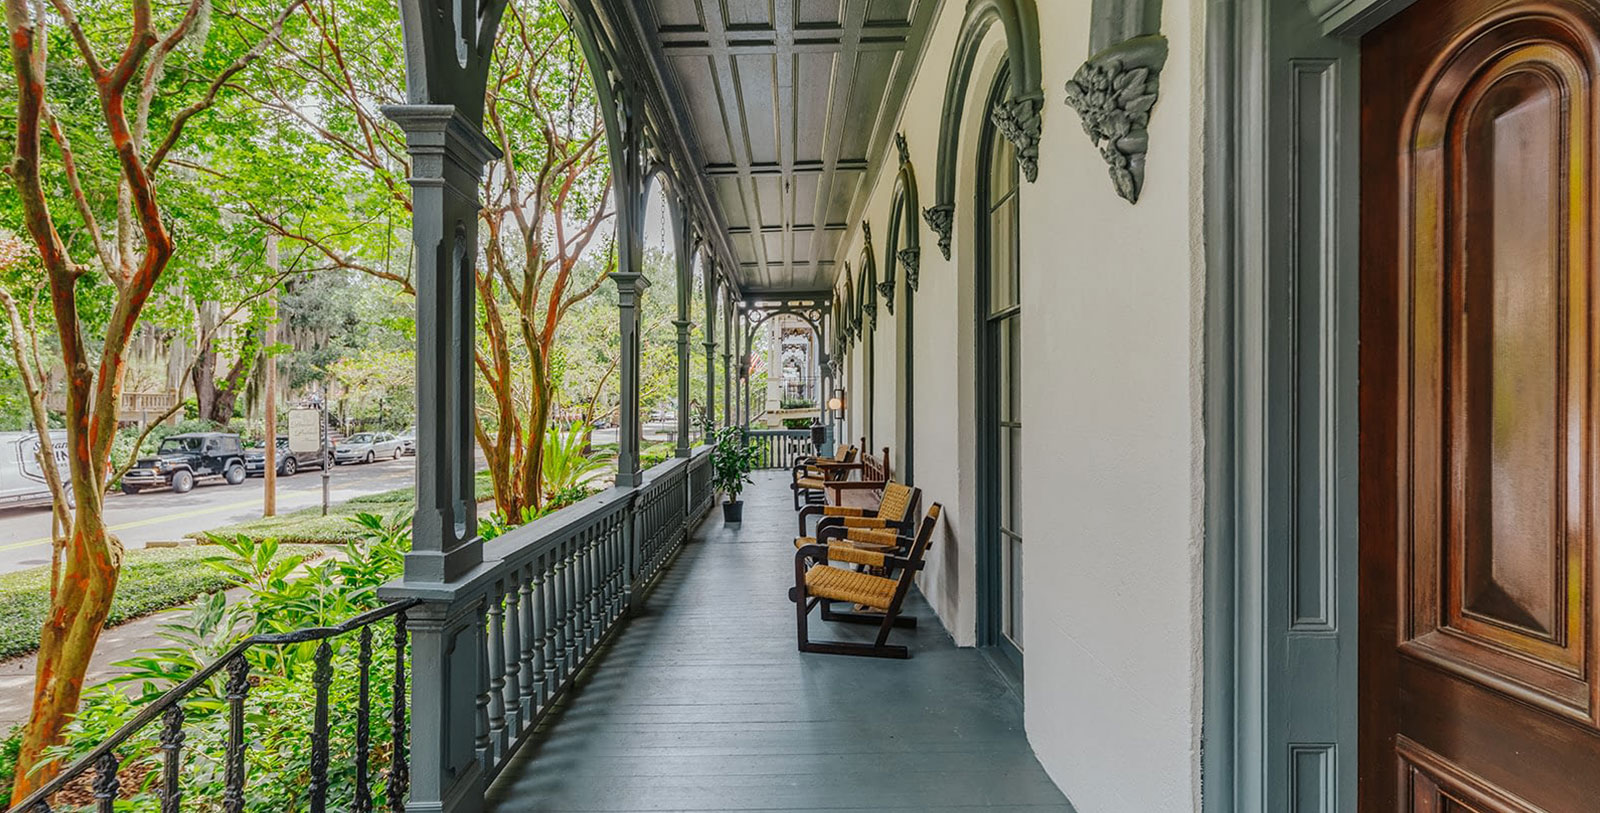 Stroll through nearby Forsyth Park and enjoy the scenic beauty of Savannah's historic district.